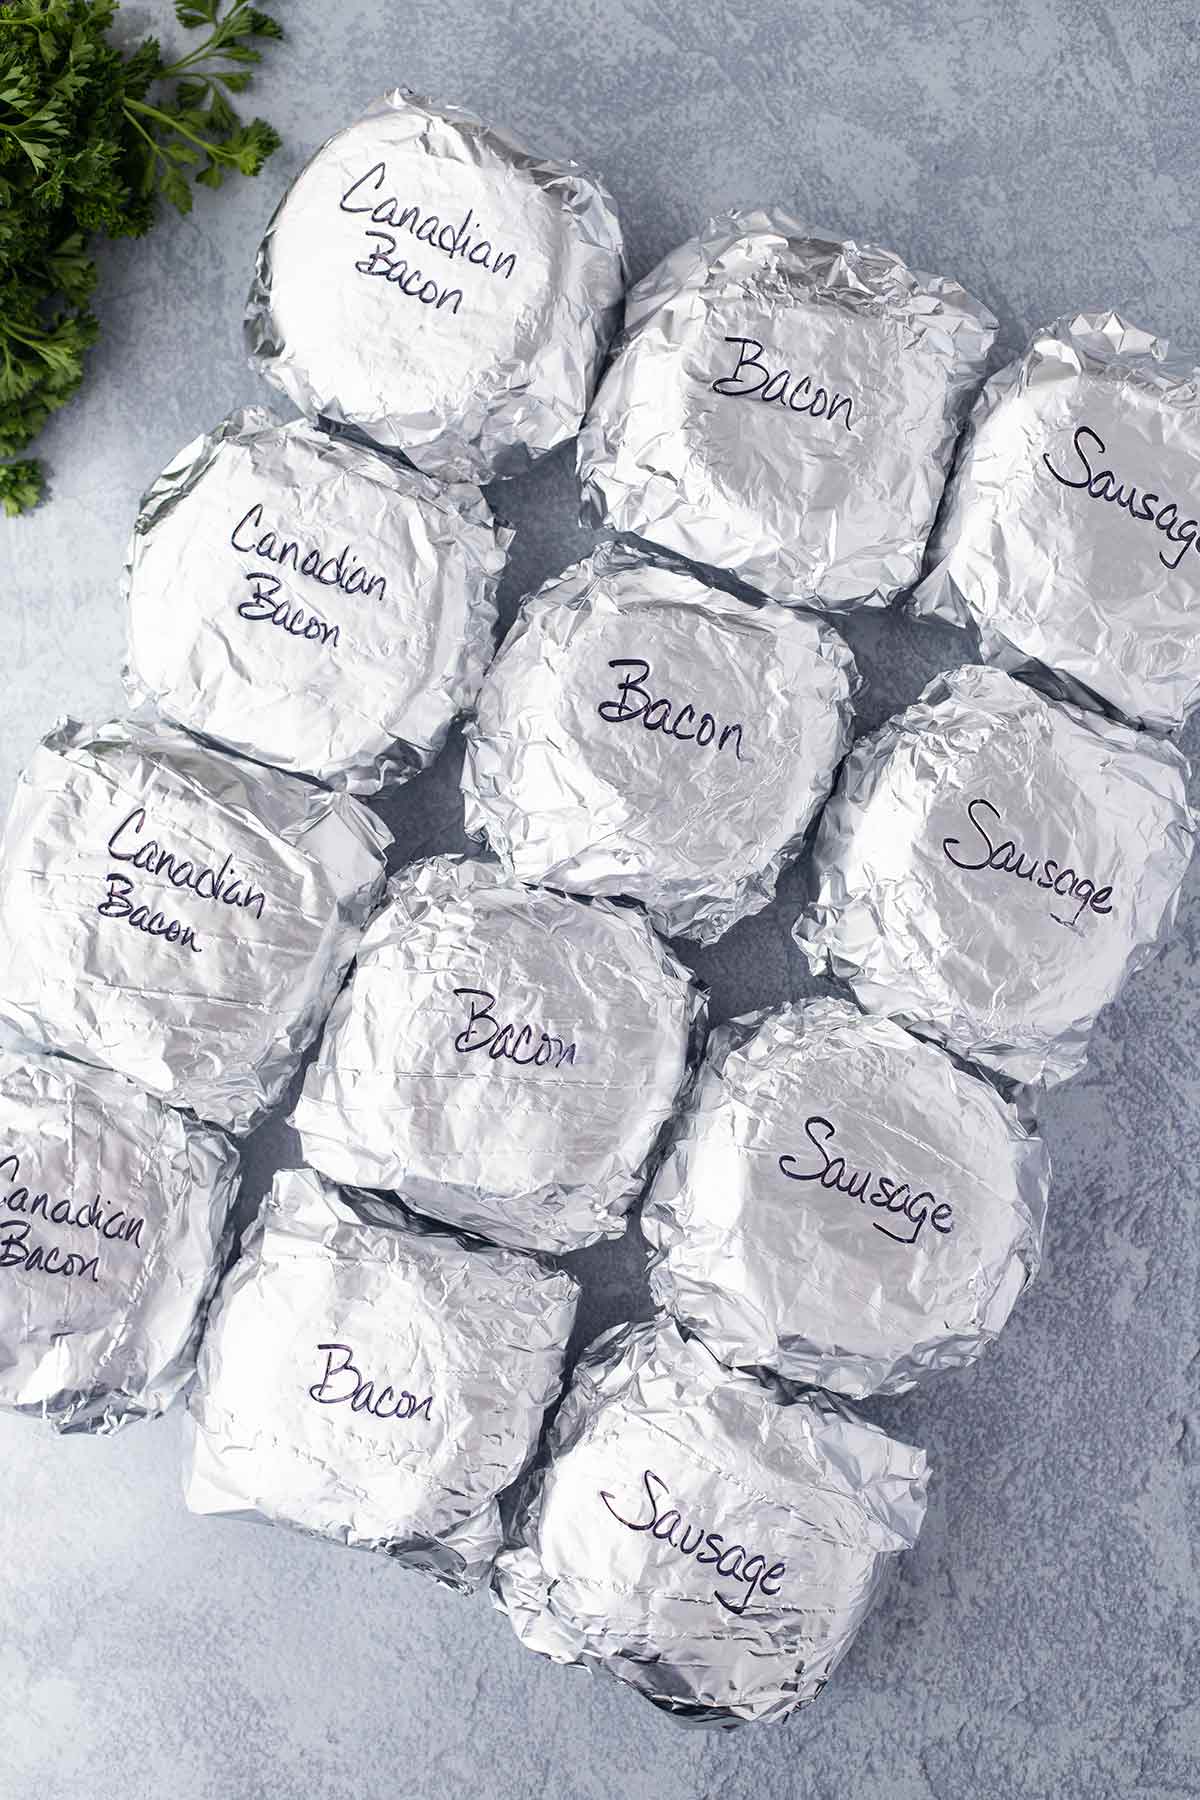 Overhead shot showing a dozen wrapped sandwiches that have been labeled according to the type of meat used.